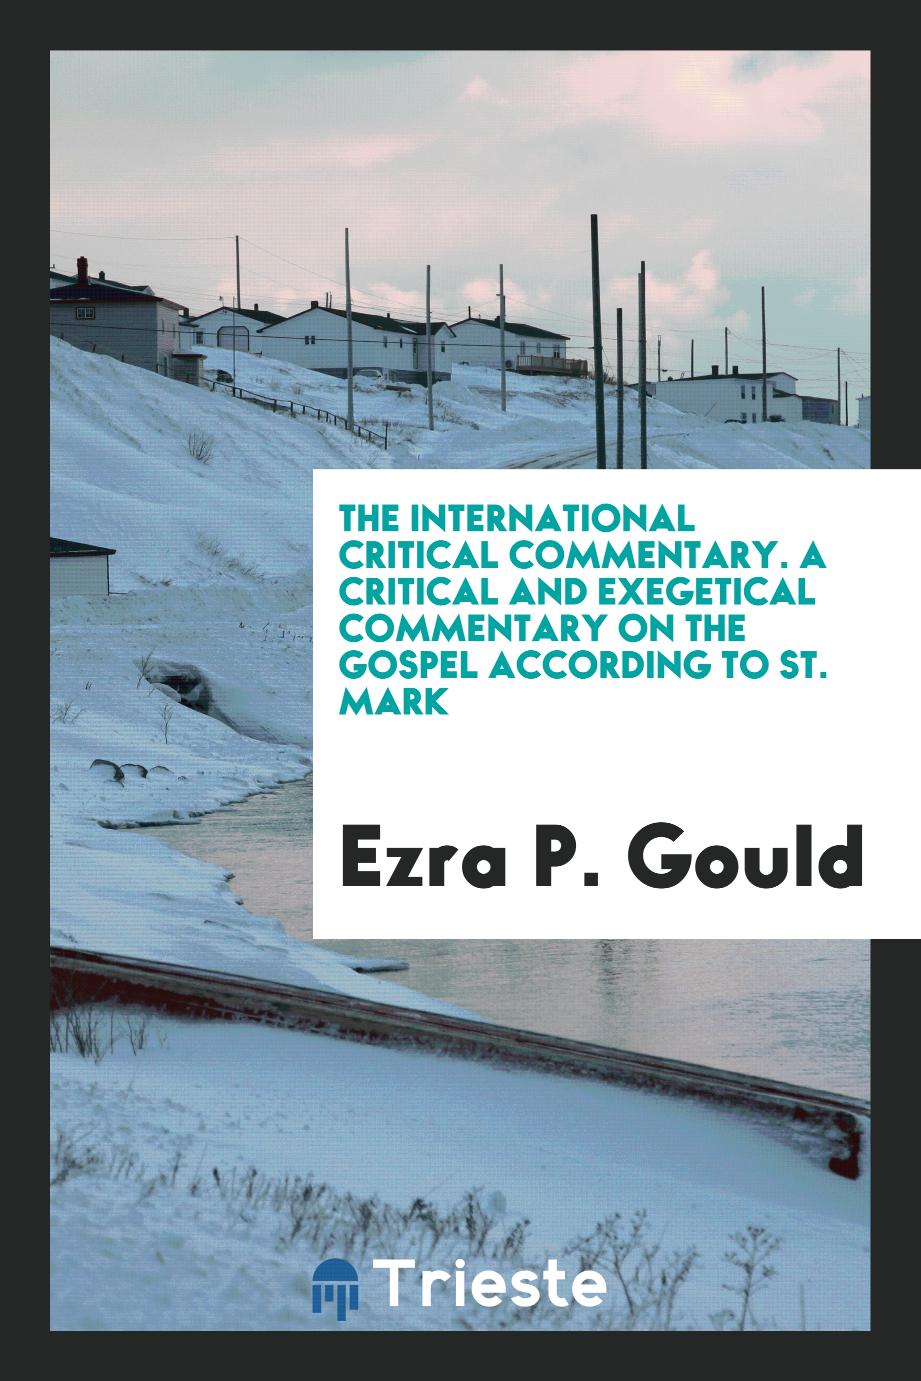 The International Critical Commentary. A Critical and Exegetical Commentary on the Gospel According to St. Mark